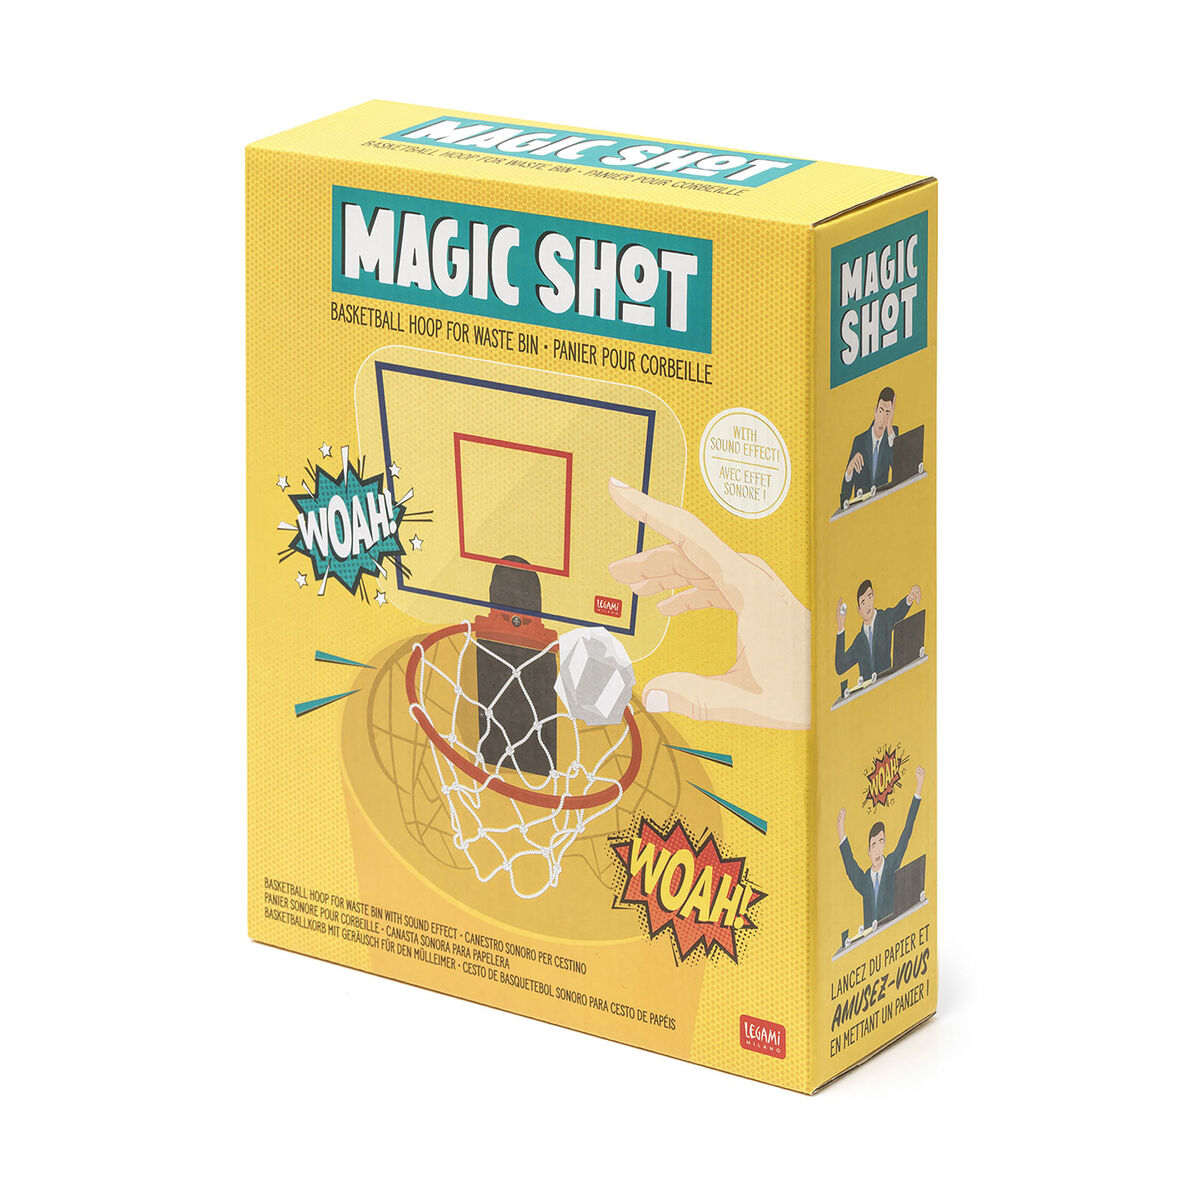 Legami Magic Shot Box | Unique Gift Ideas for Her | for Mom | for Women | for Females | for Wife | for Sister | for Girlfriend | for Grandma | for Friends | for Birthday | Gifting Made Simple | Unique Gift Ideas for Him | for Dad | for Men | for Males | for Husband | for Brother | for Boyfriend | for Grandad